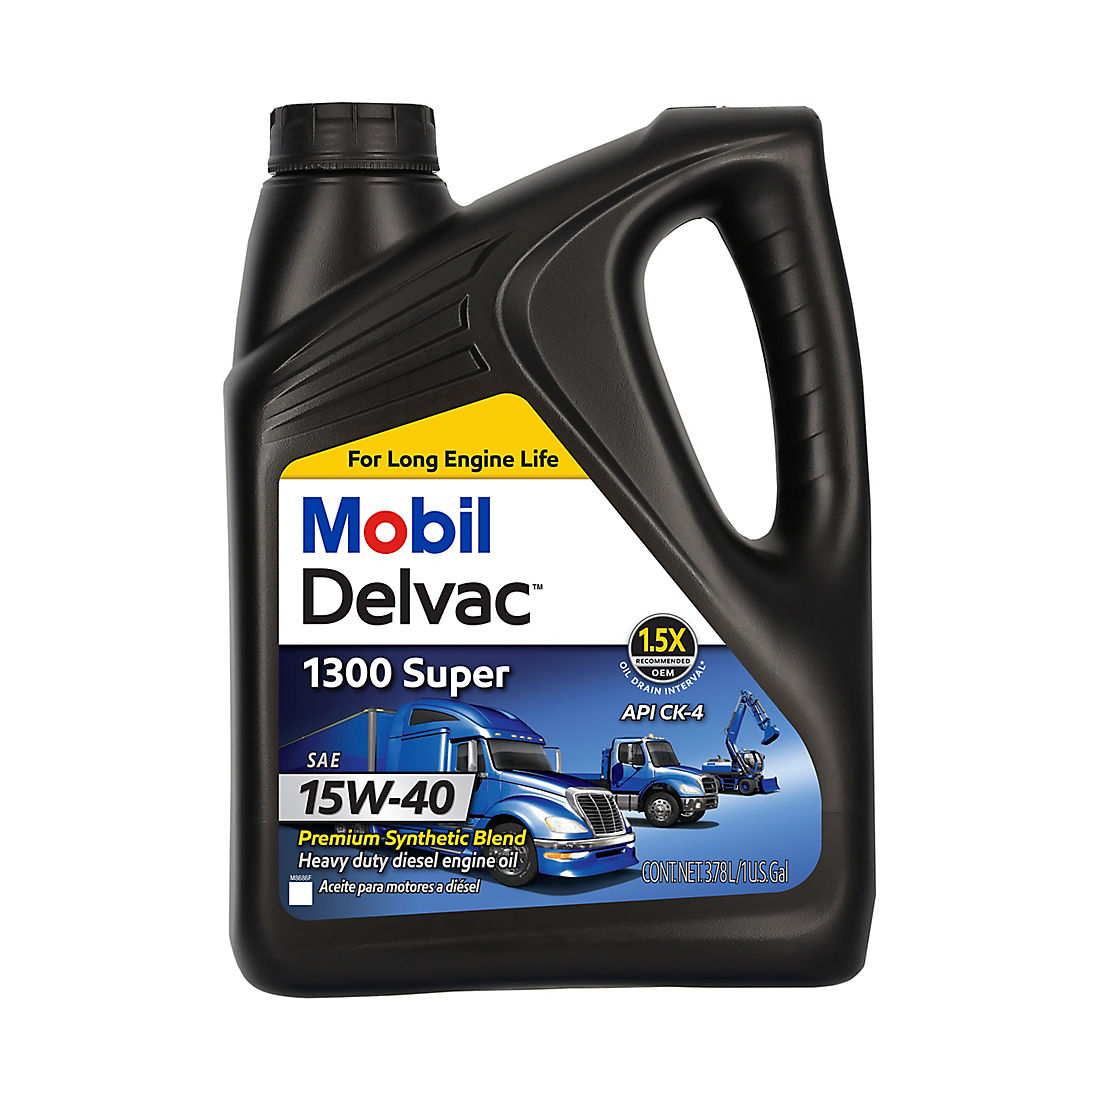 Масло delvac 10w 40. Mobil Delvac 10w 40 Diesel. Mobil 10w 40 Synthetic engine Oil. Мобил Делвак 10w 50. Oil Motor SAE 15w40.